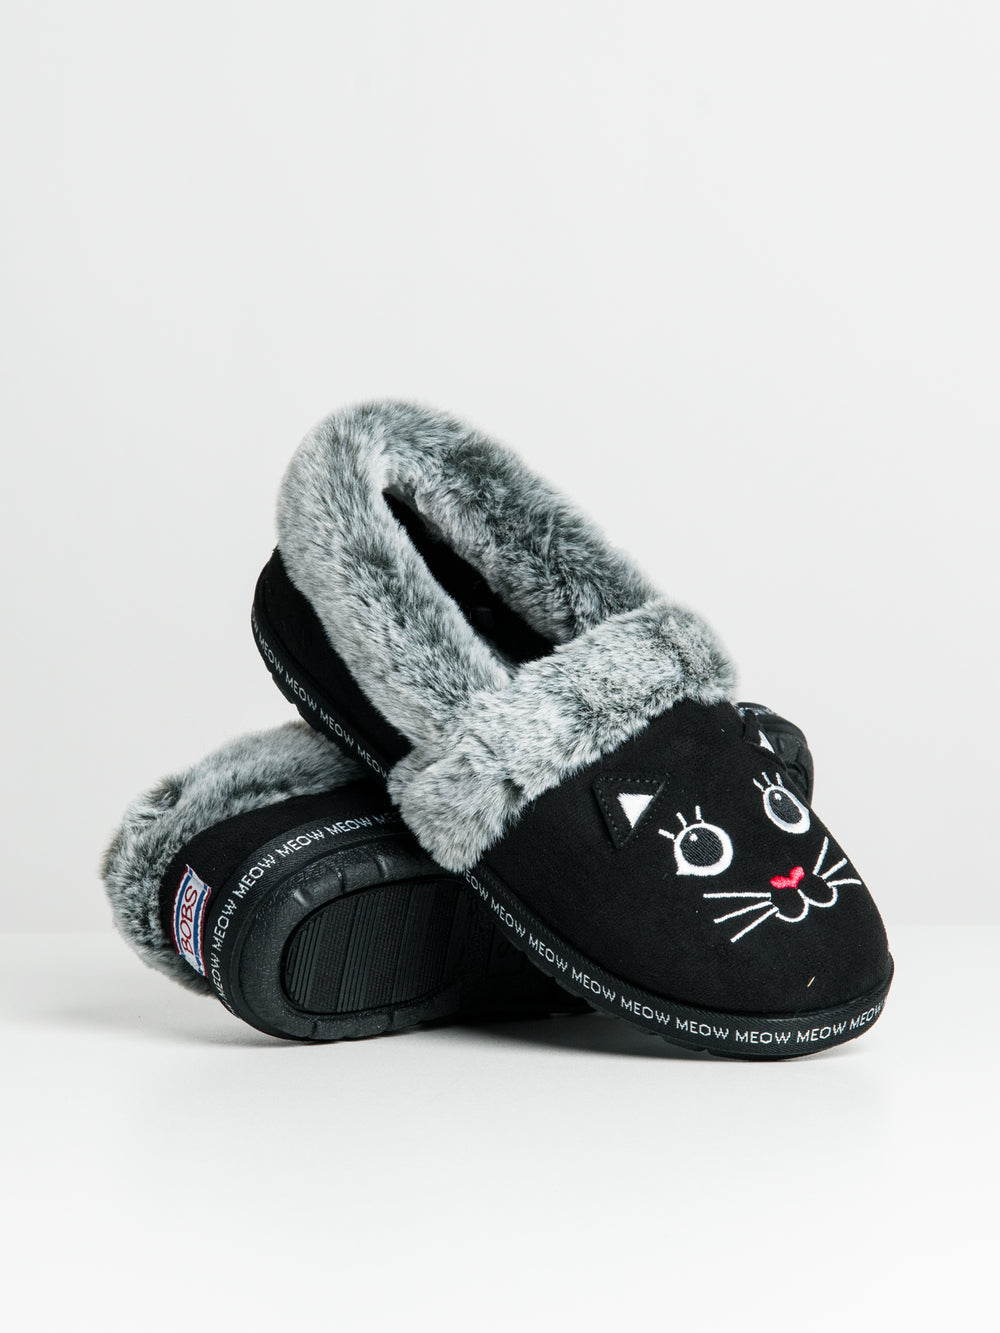 WOMENS SKECHERS BOBS TOO COZY CAT SLIPPER - CLEARANCE